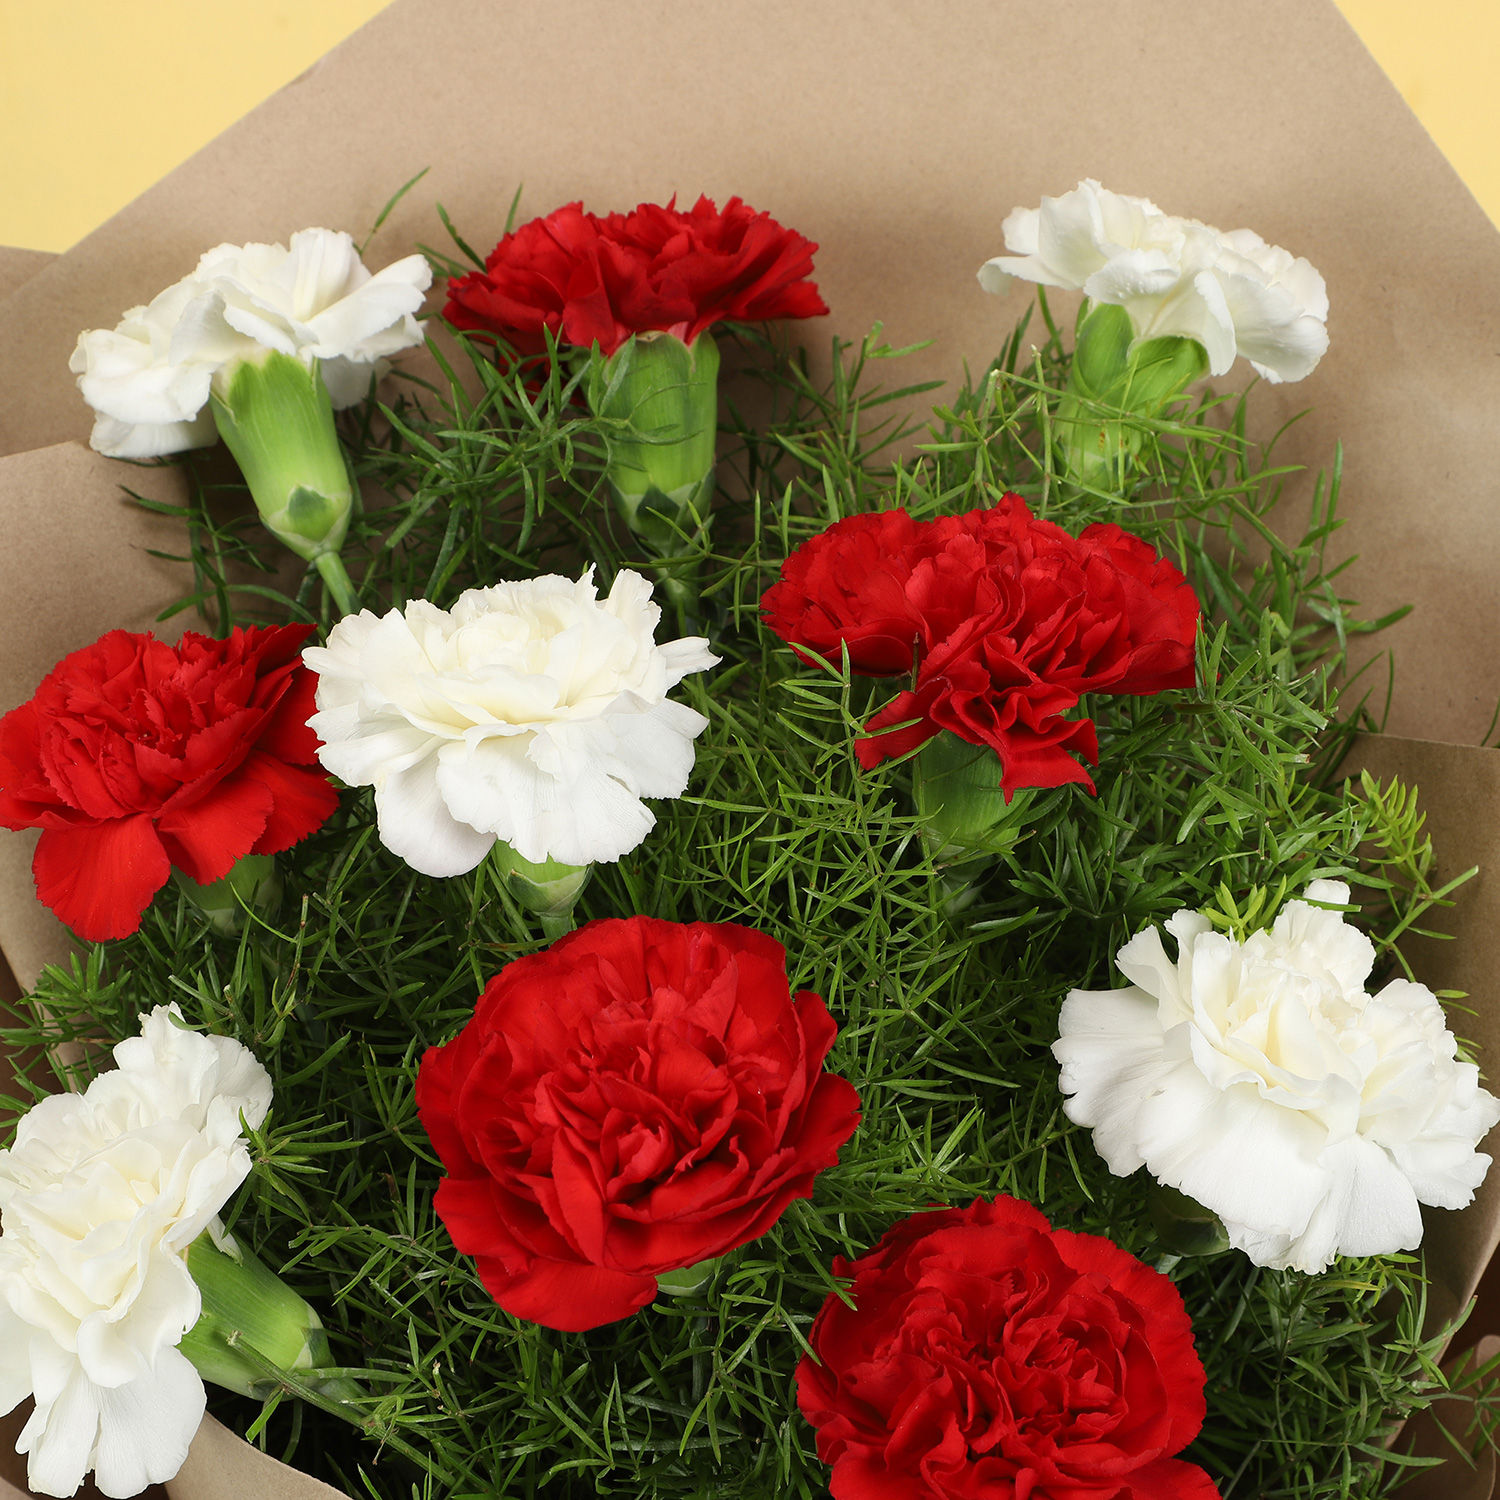 Online 10 Romantic Red White Carnations Gift Delivery in Singapore ...